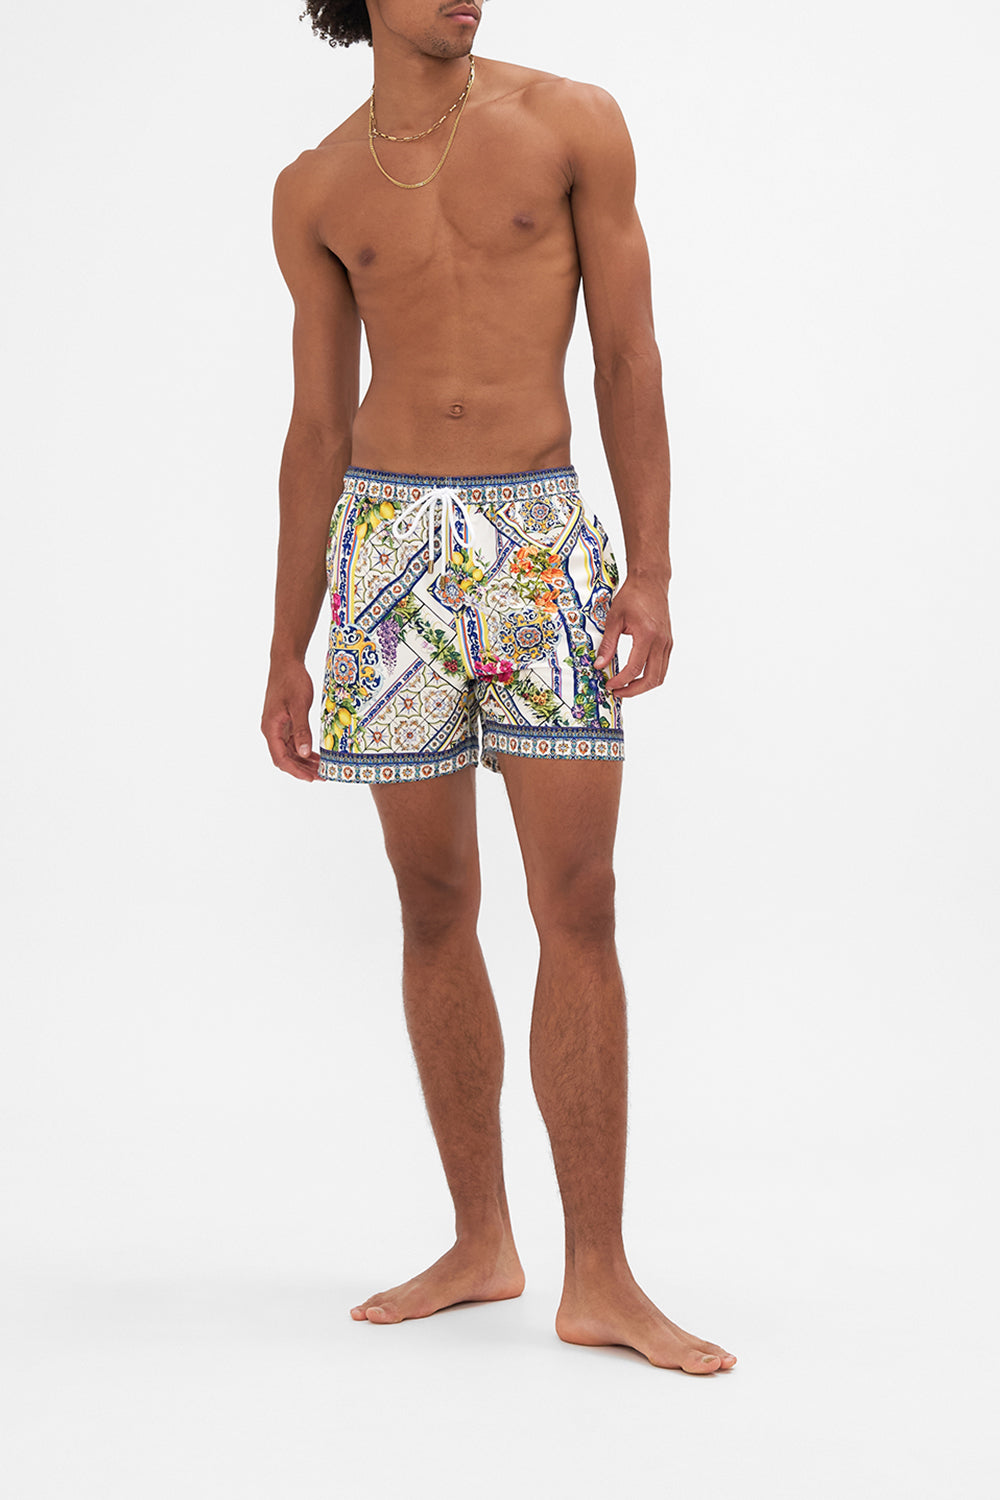 Front view of model waering HOTEL FRANKS BY CAMILLA mens boardshorts in Amalfi Amore print